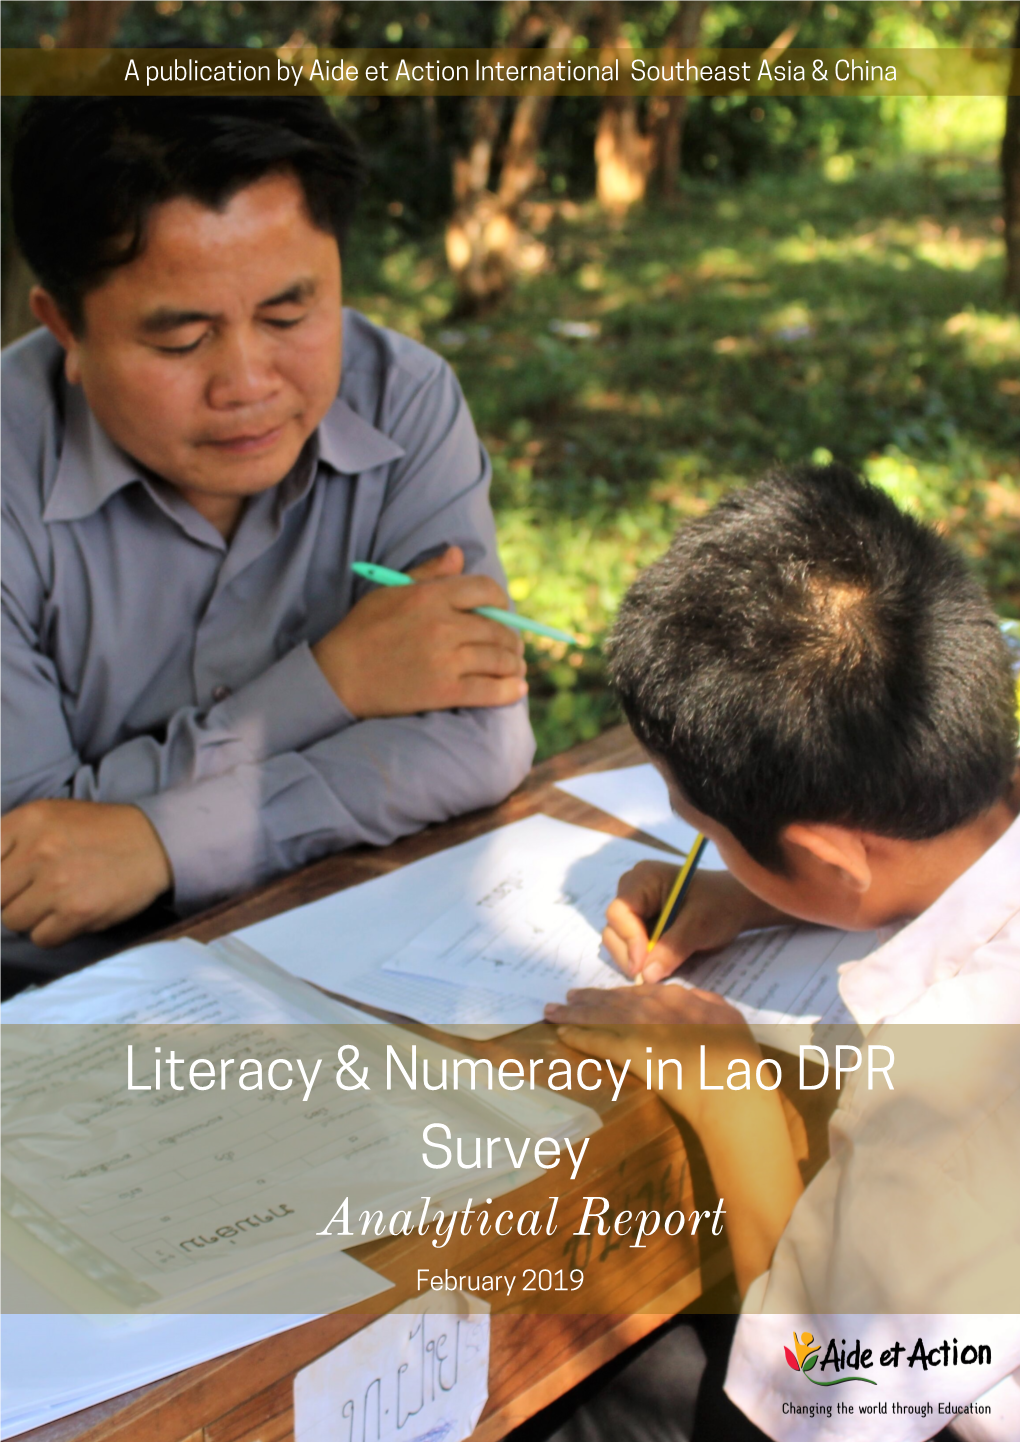 Literacy and Numeracy in Lao PDR Survey: Analytical Report Published February 2019 © Aide Et Action International Southeast Asia & China, 2019